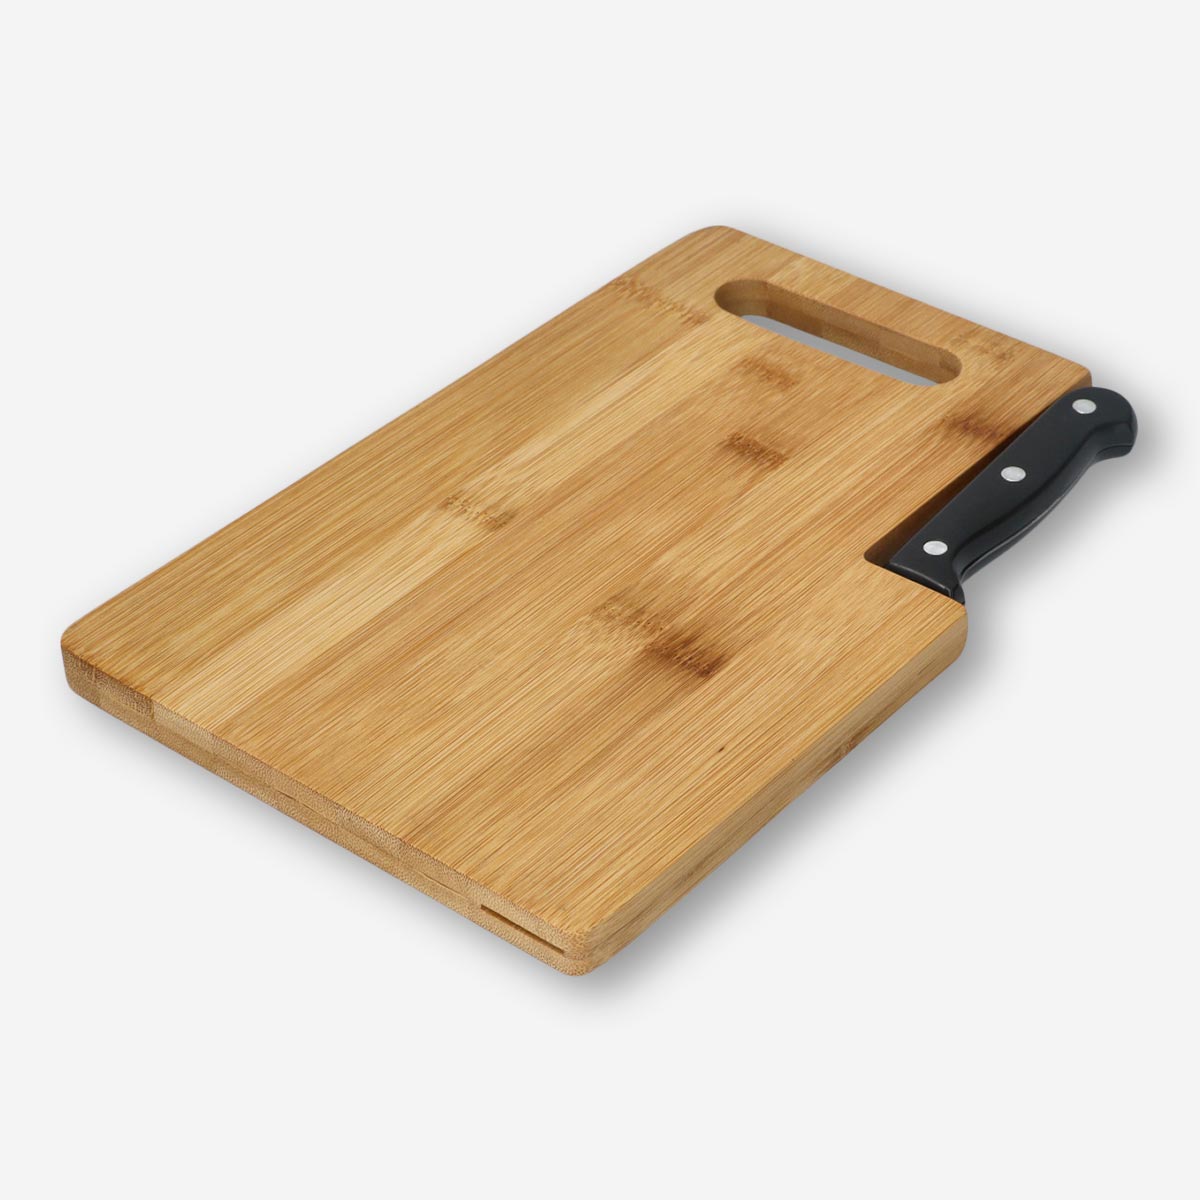 Cutting board. With knife Kitchen Flying Tiger Copenhagen 